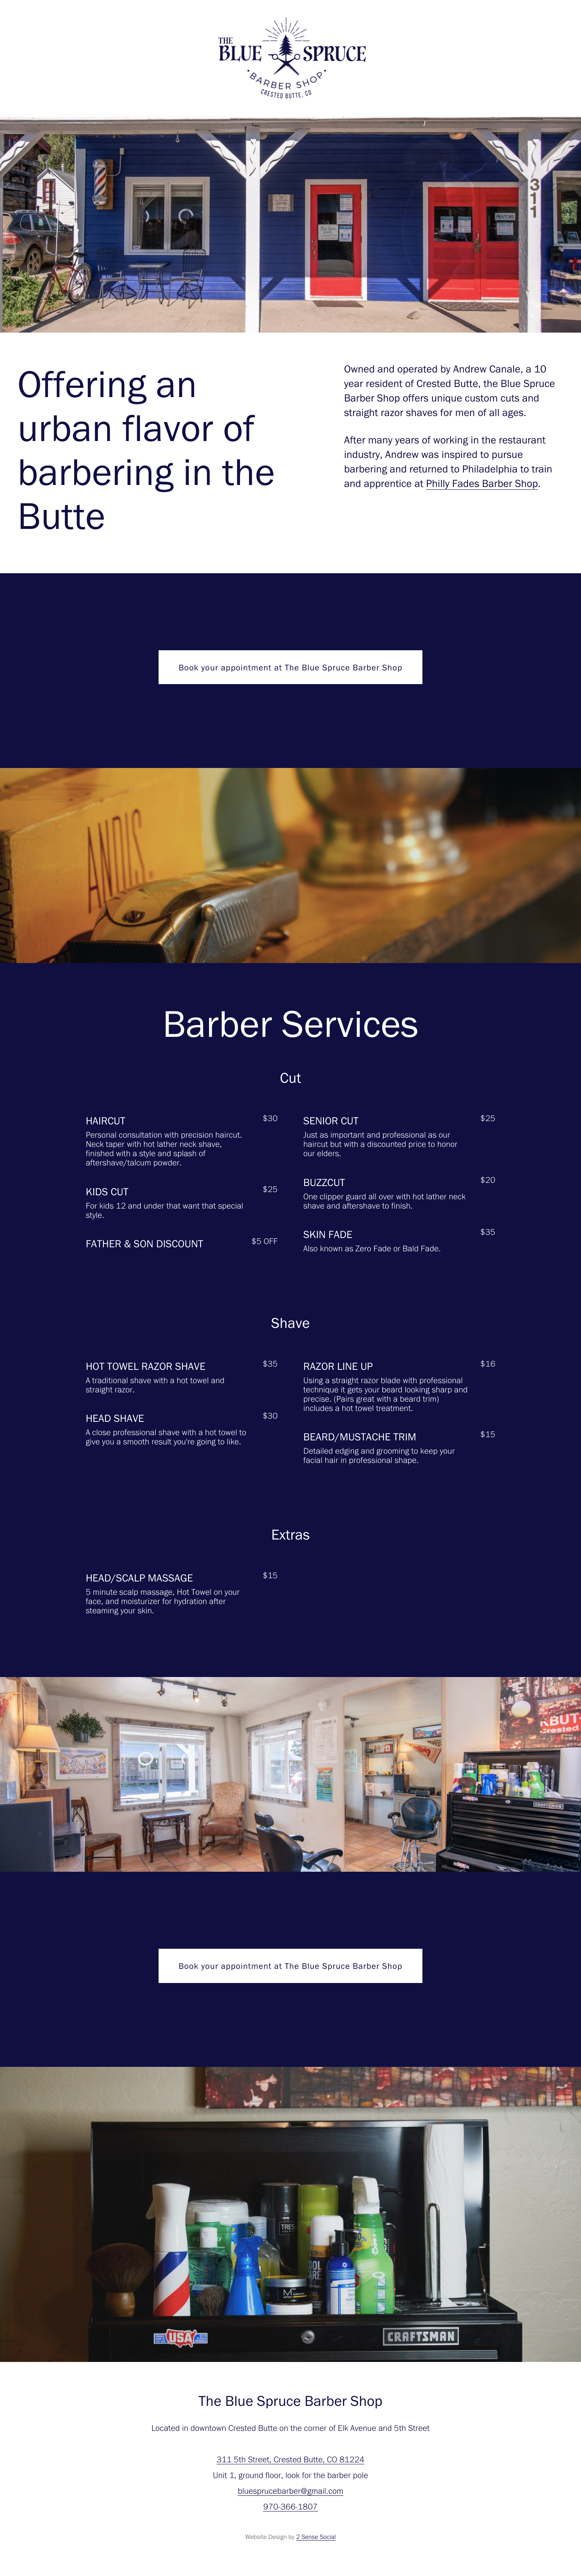 Barber Shop - a functional one page site